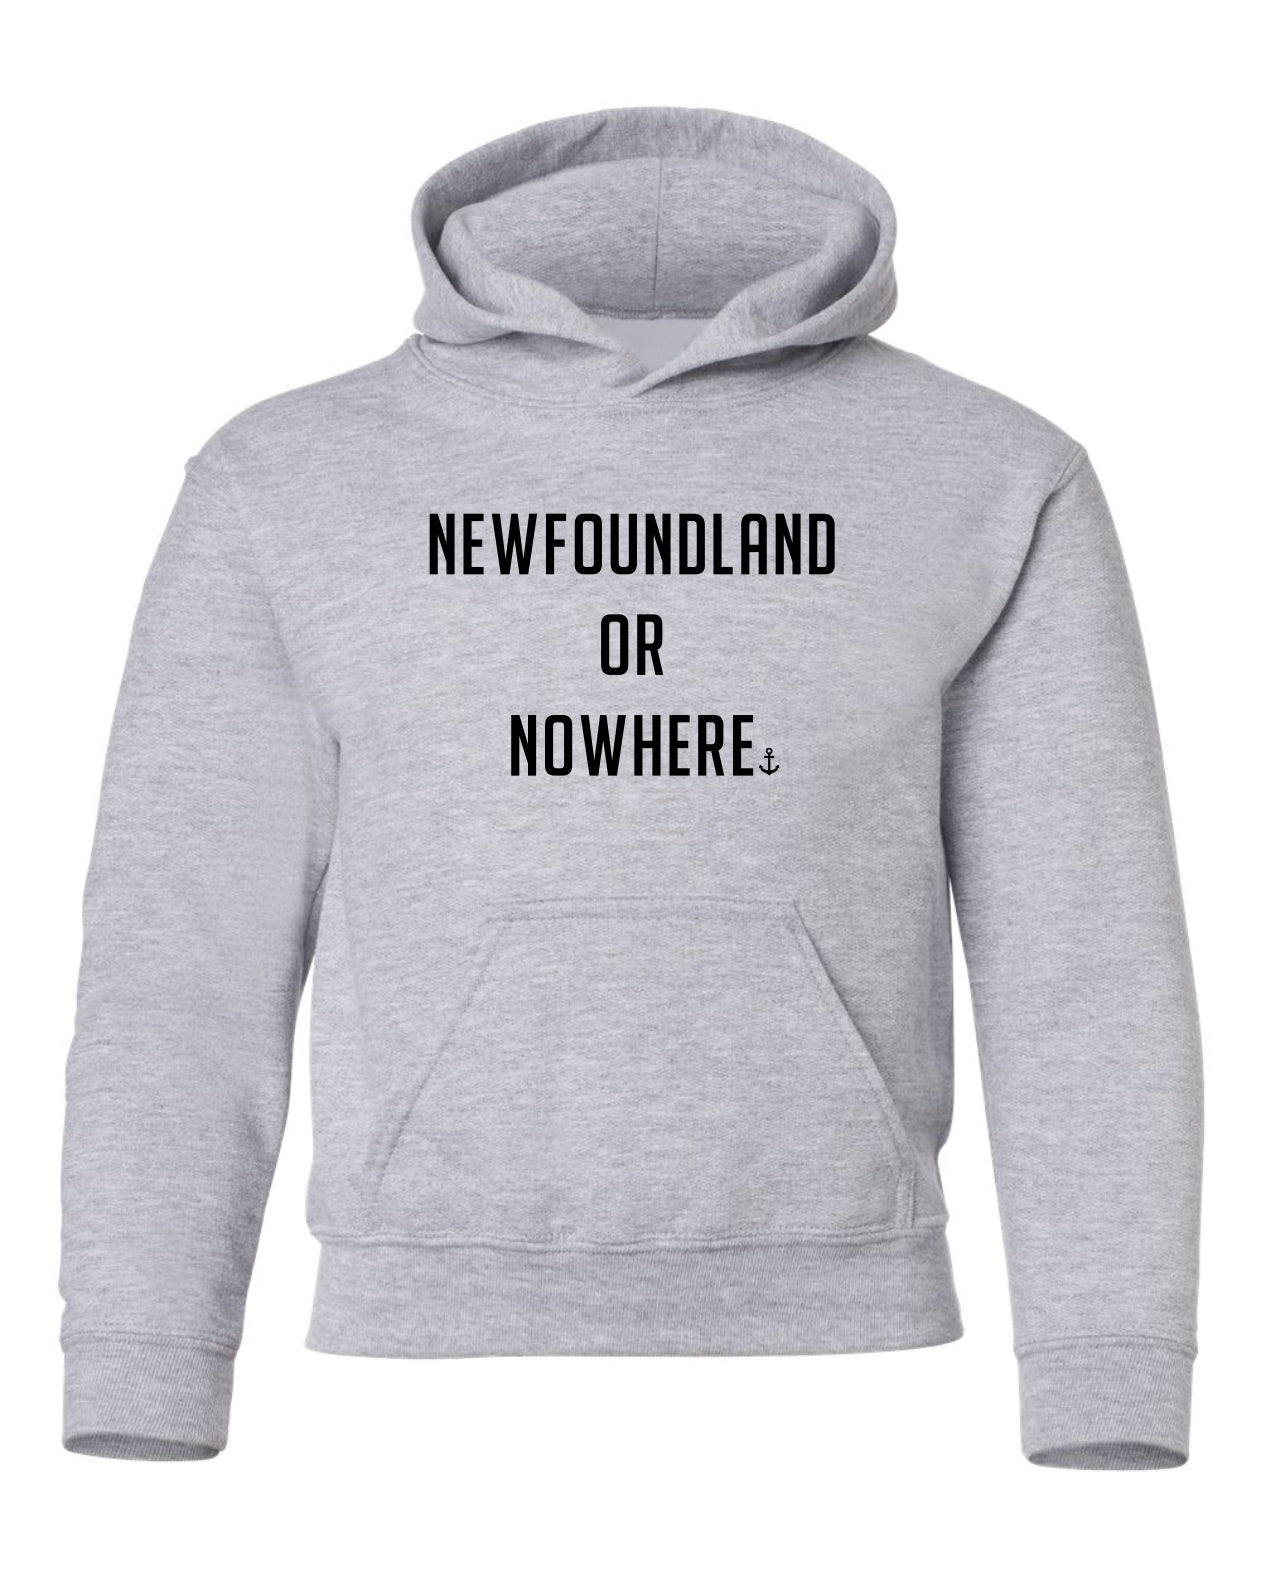 "Newfoundland Or Nowhere" Youth Hoodie